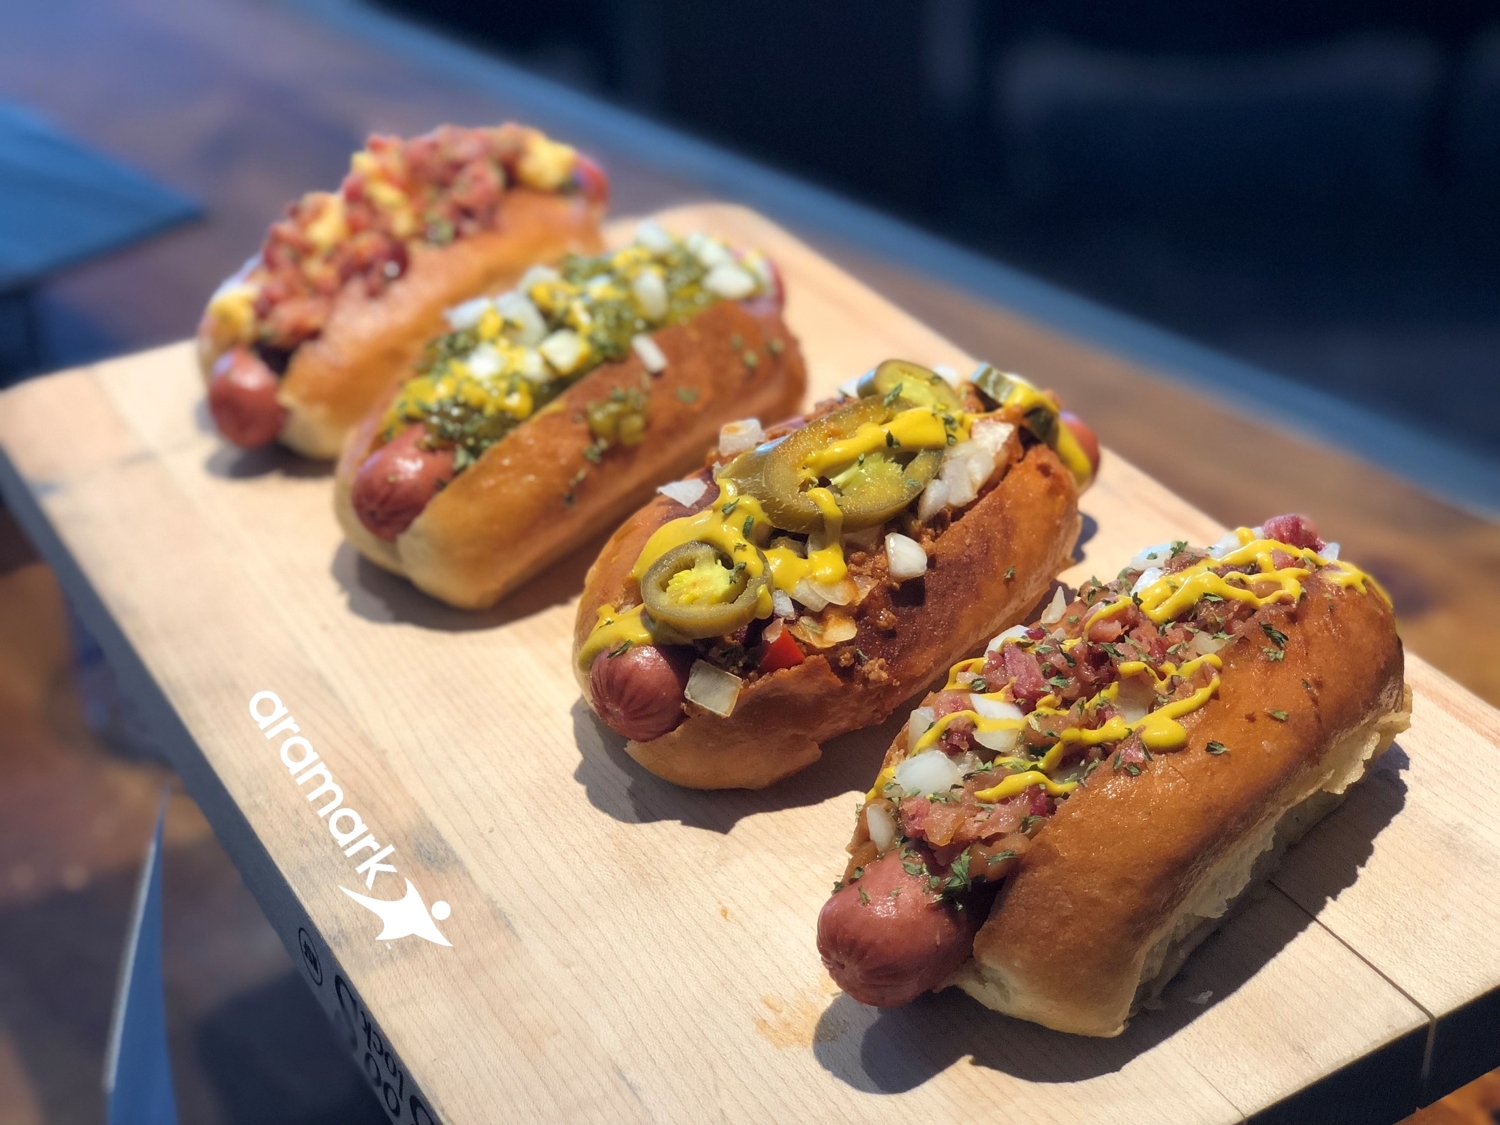 Savor the taste of ballpark hot dogs in the comfort of your own